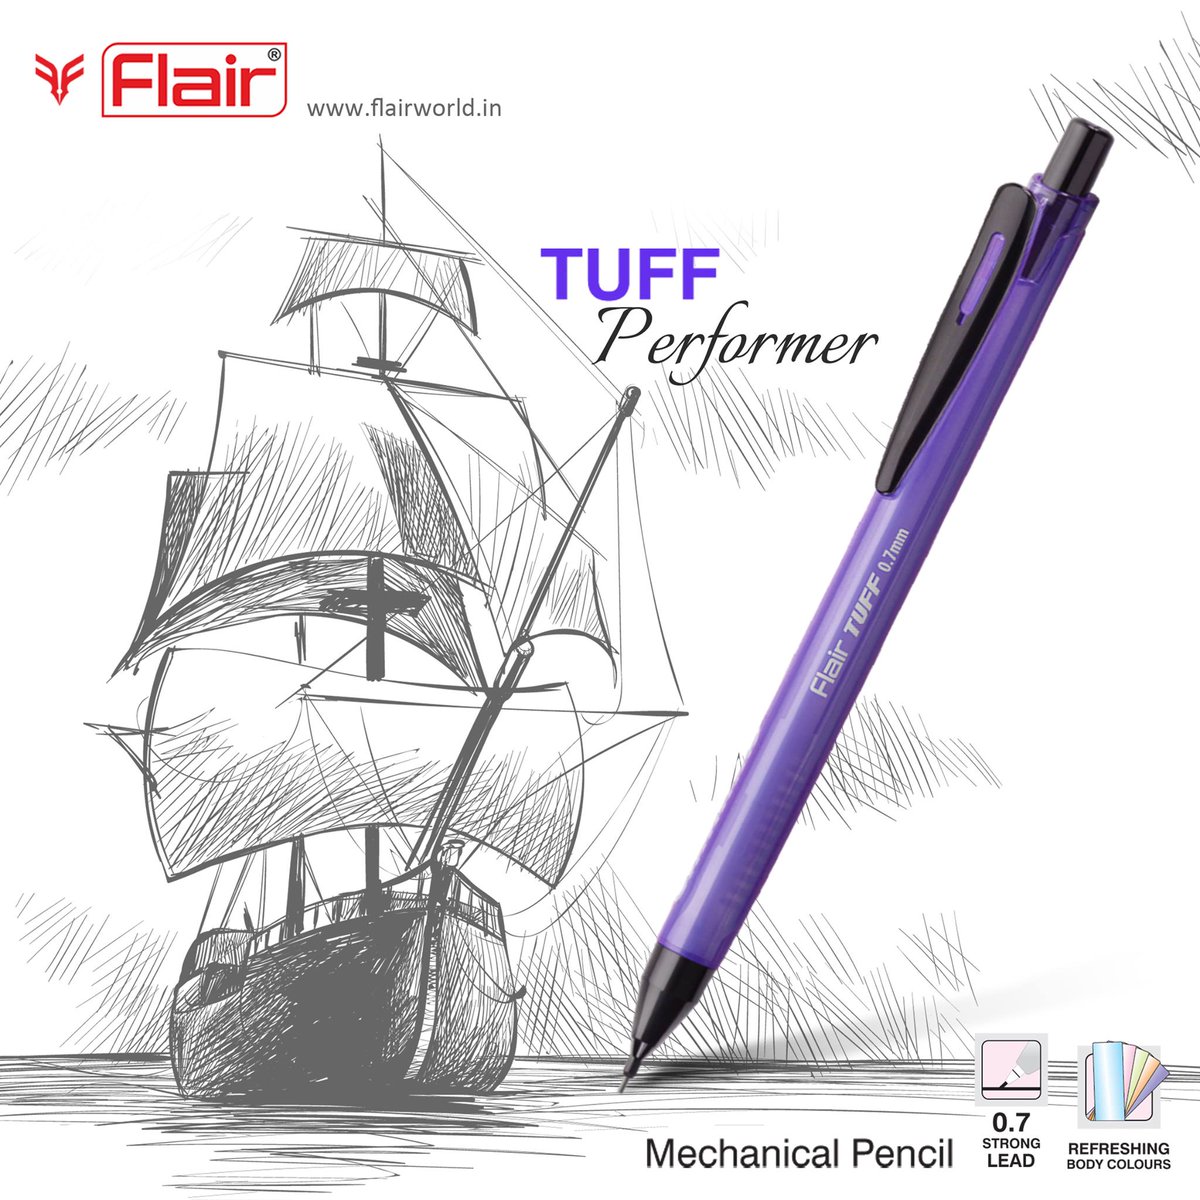 Sketching is now more fun with Flair TUFF mechanical pencils ✍️

#flairworld #flairpens #Tuff #mechanicalpencils #sketching #fun #drawing #refreshingbodycolours #stronglead #writingcommunity